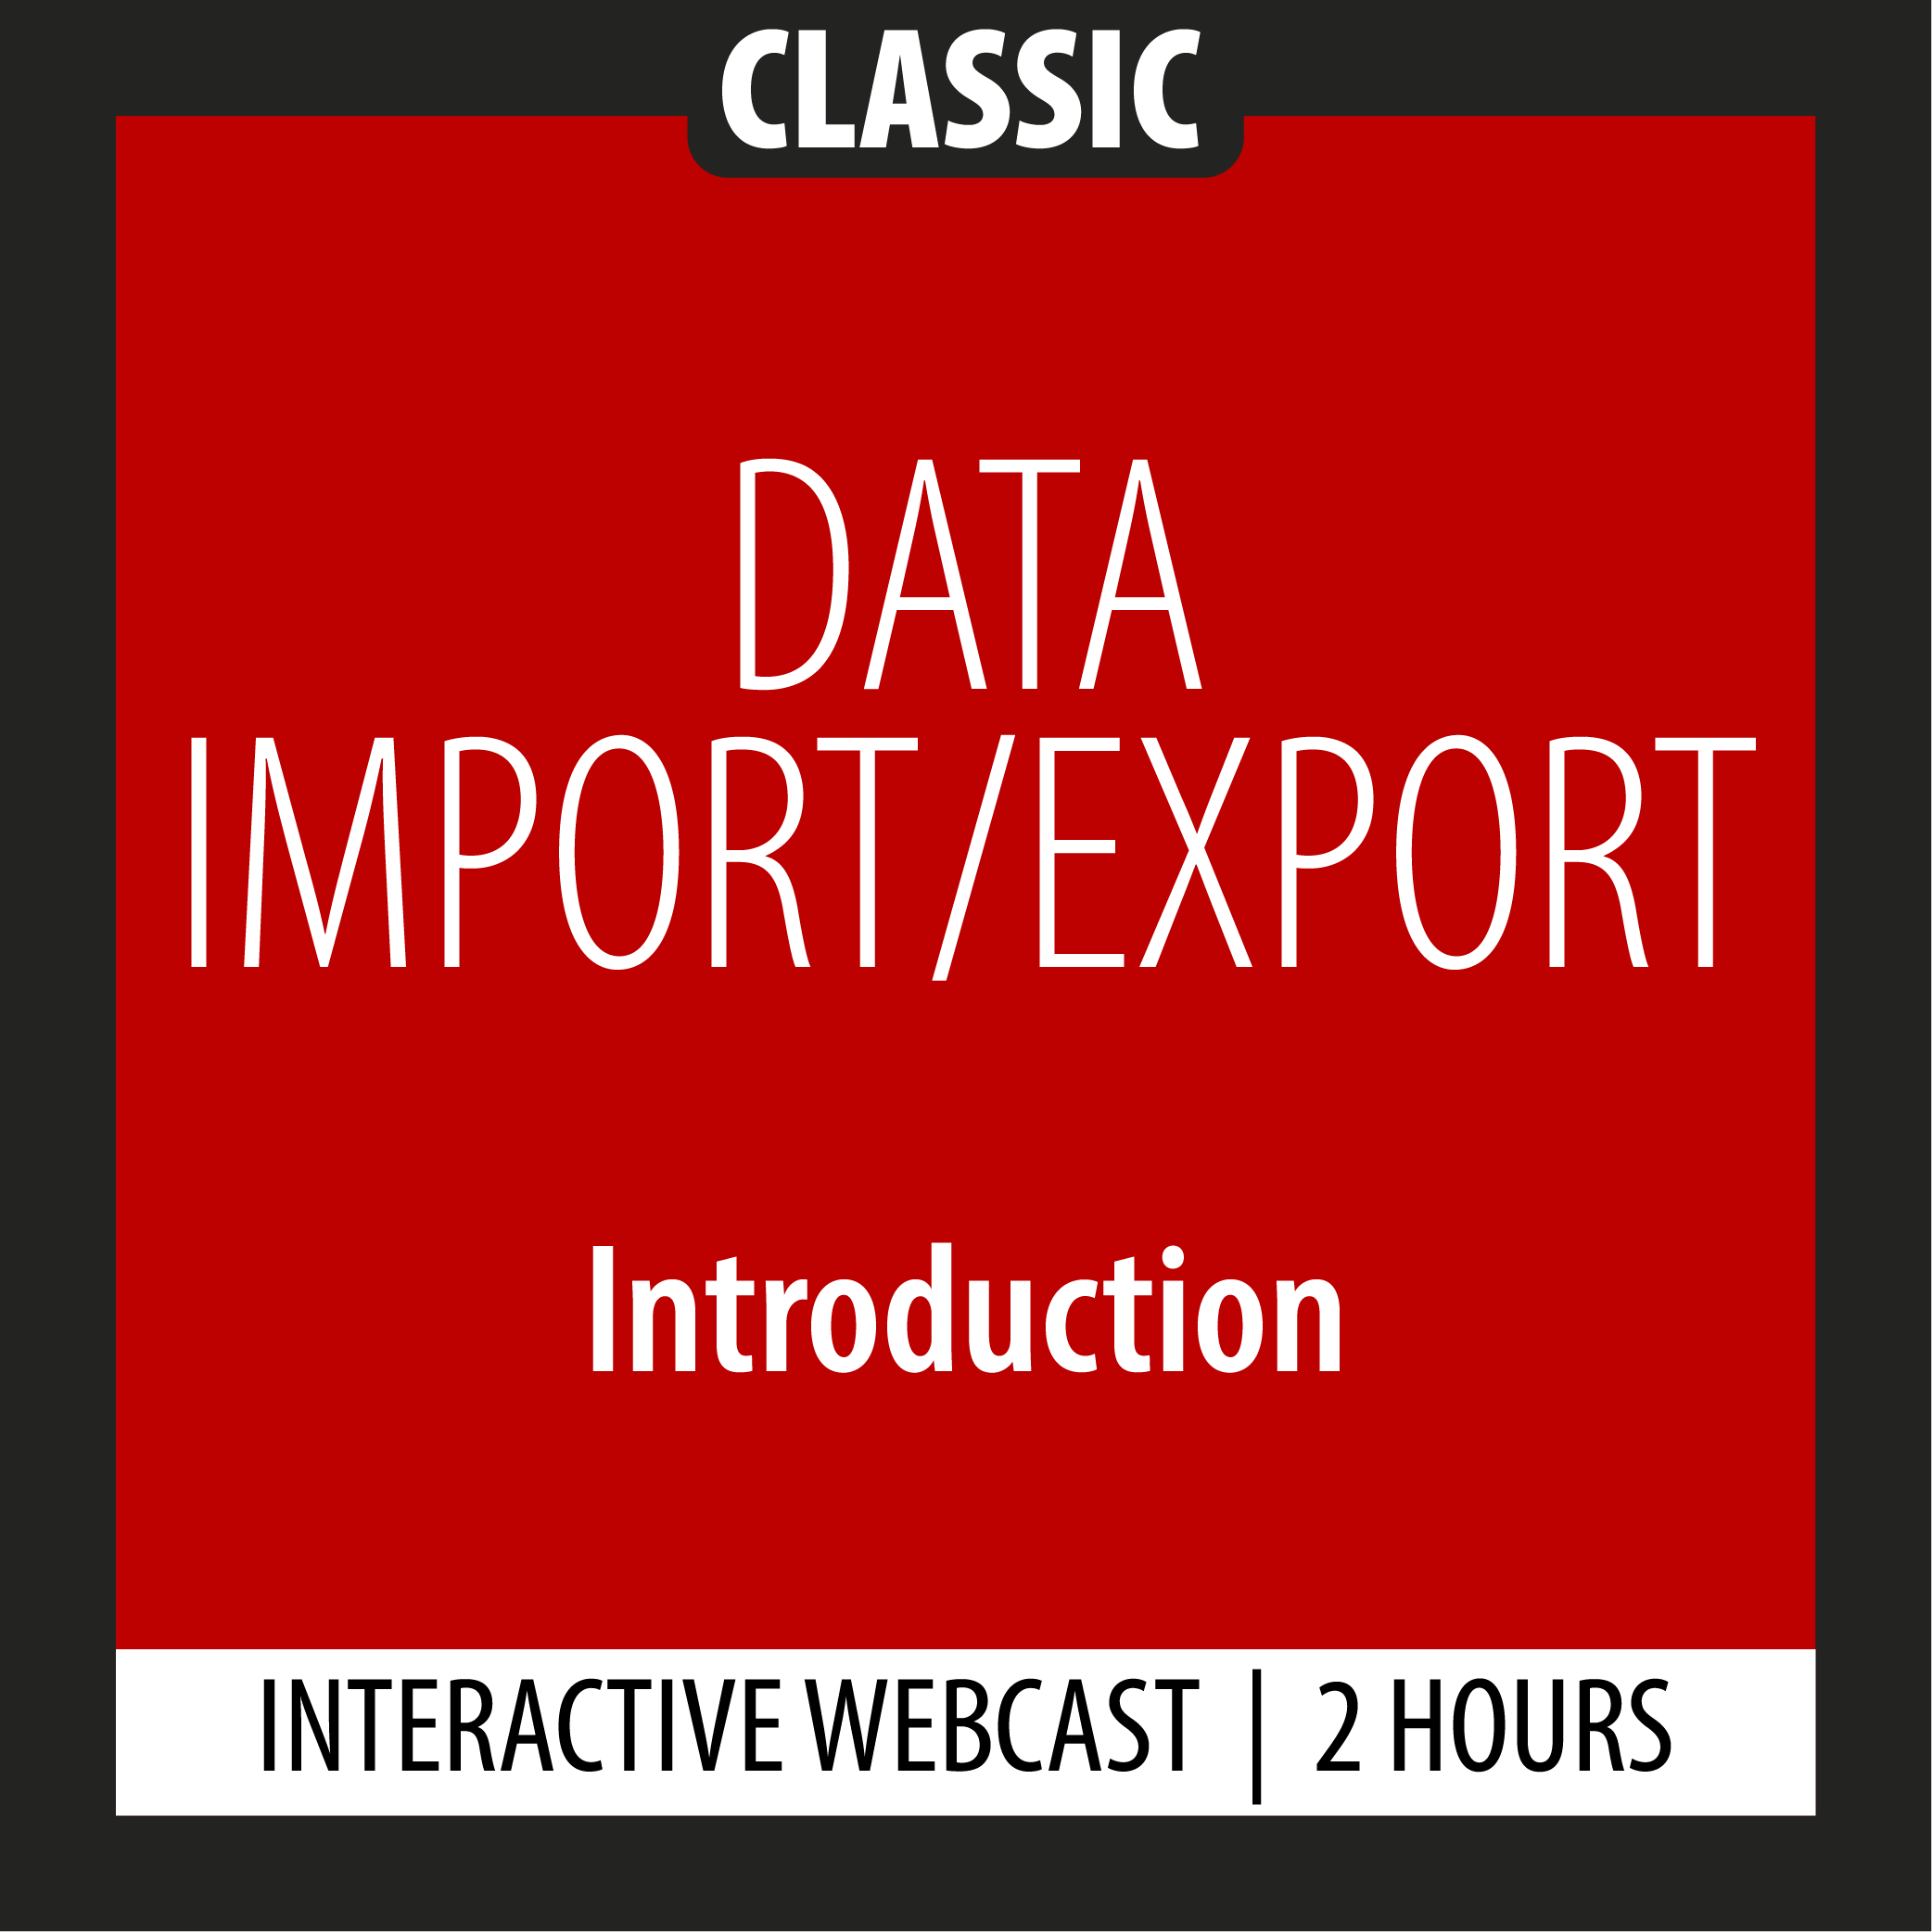 Classic - Data Import/Export - Introduction - Webcast - 2 Hours